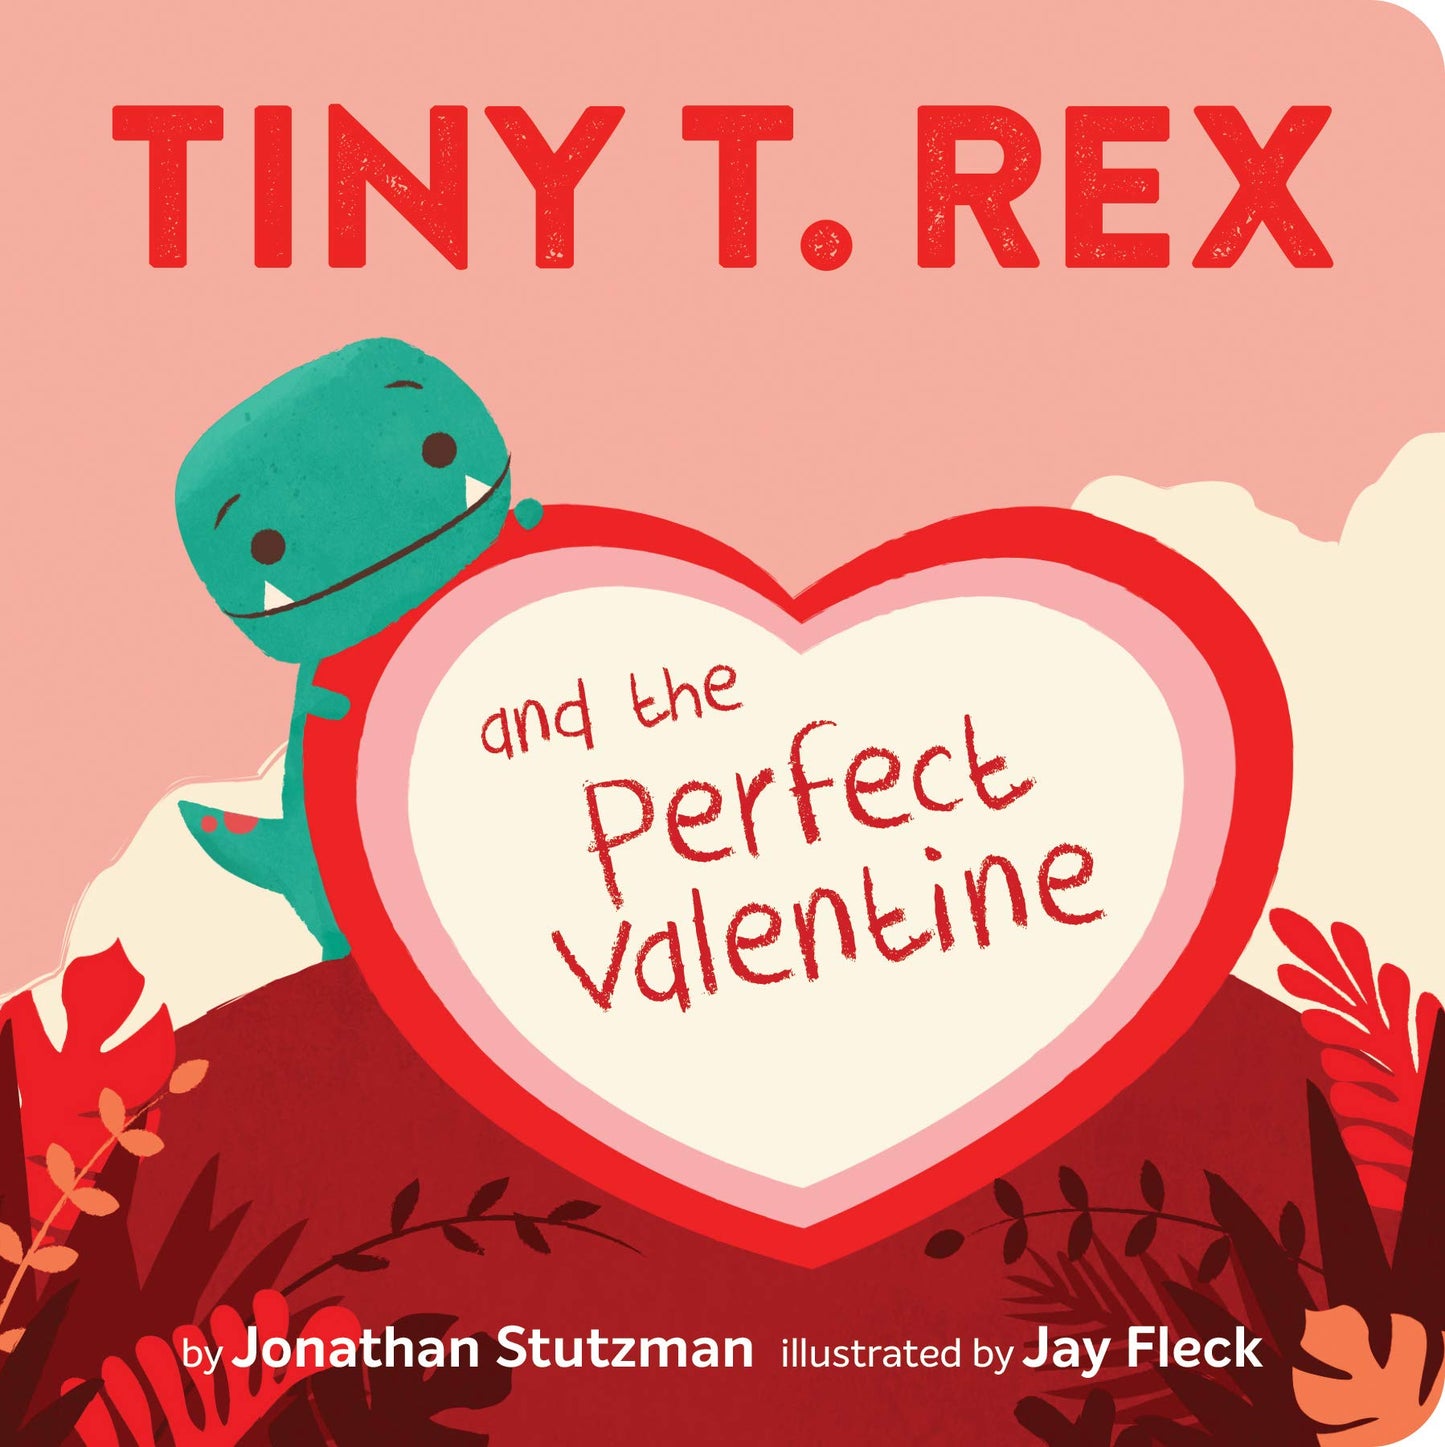 front cover of book is light pink with a teal t rex, title in red, author's name, and illustrator's name